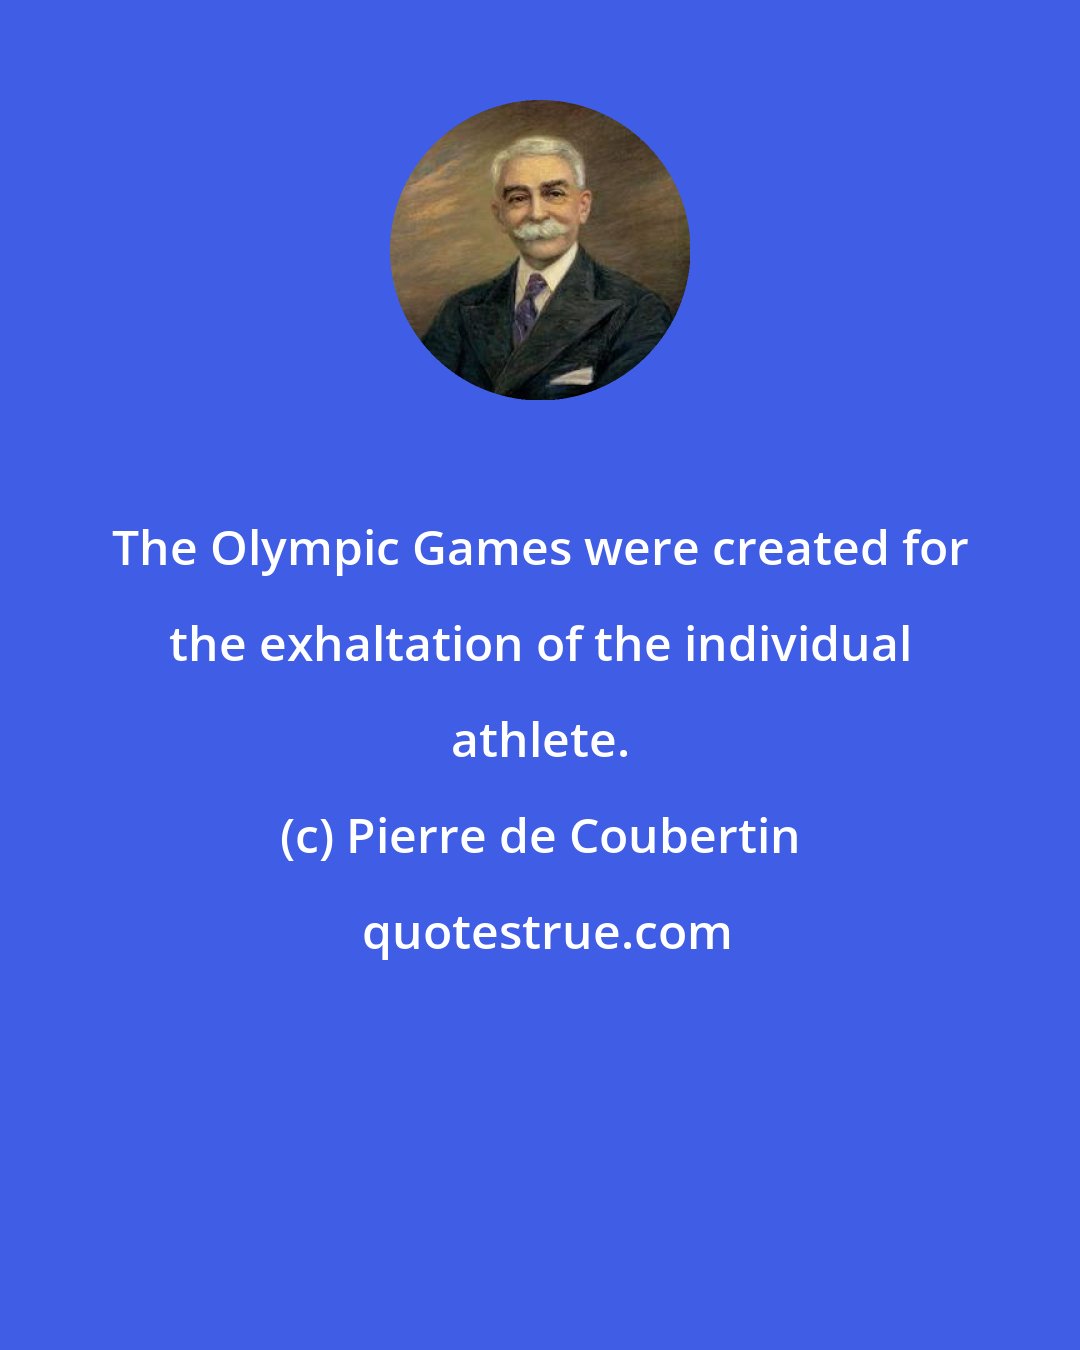 Pierre de Coubertin: The Olympic Games were created for the exhaltation of the individual athlete.